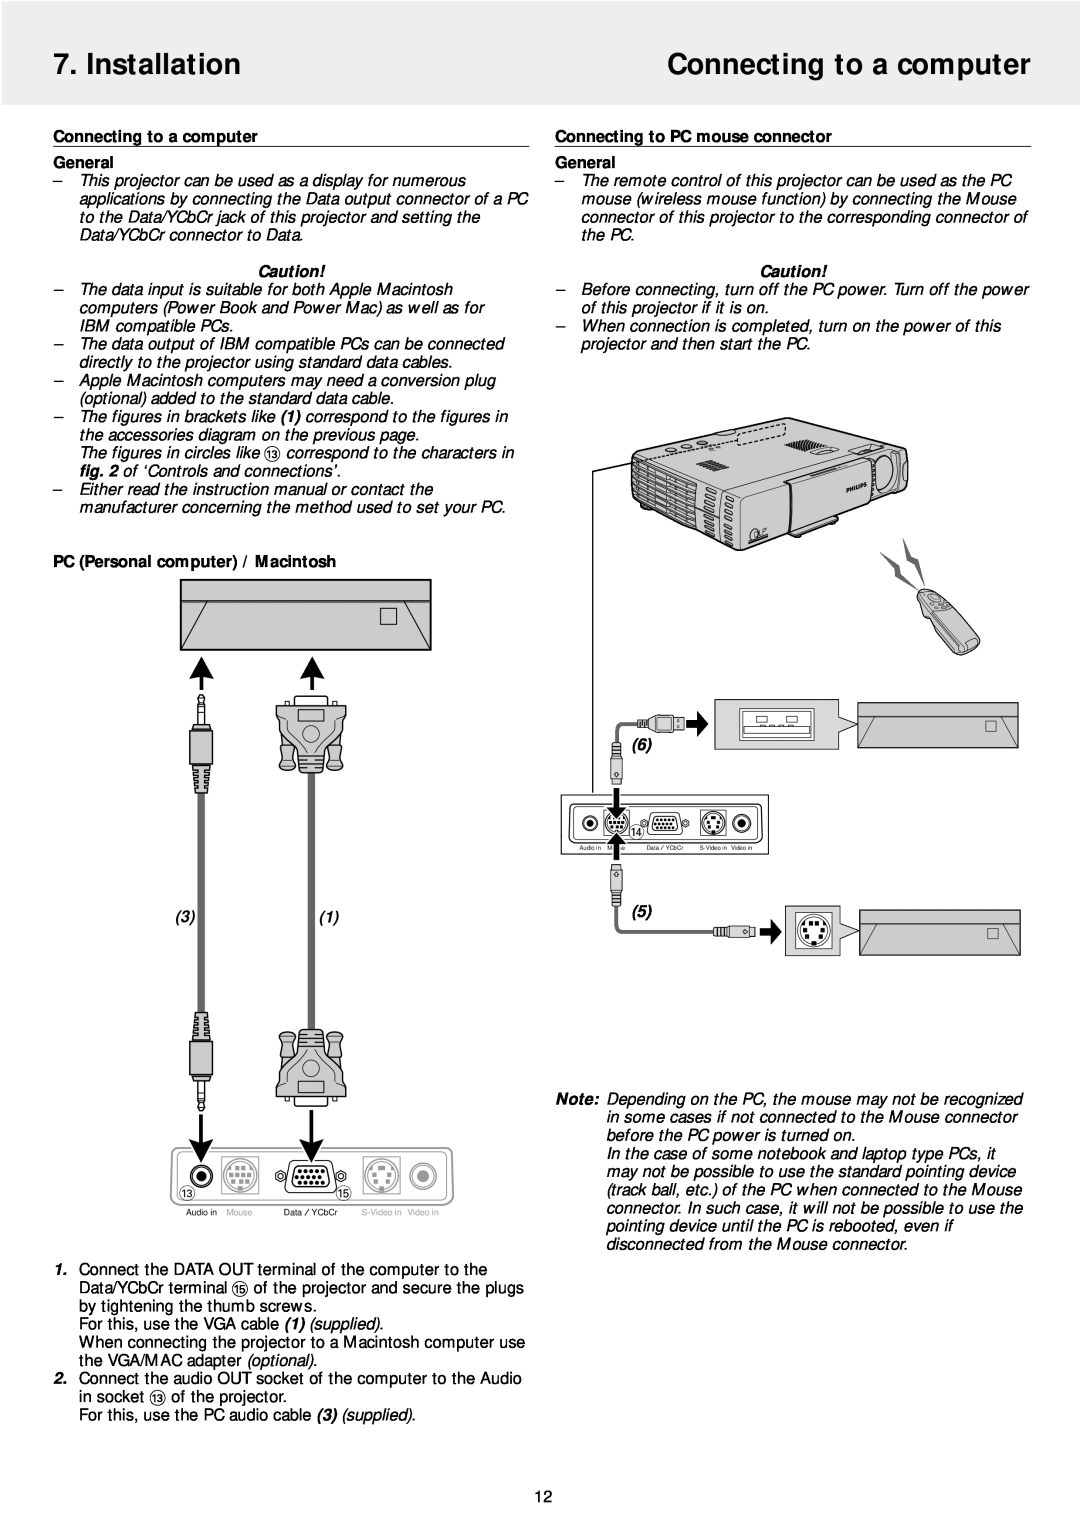 Philips LC5141 manual Installation, Connecting to a computer General, Connecting to PC mouse connector General 